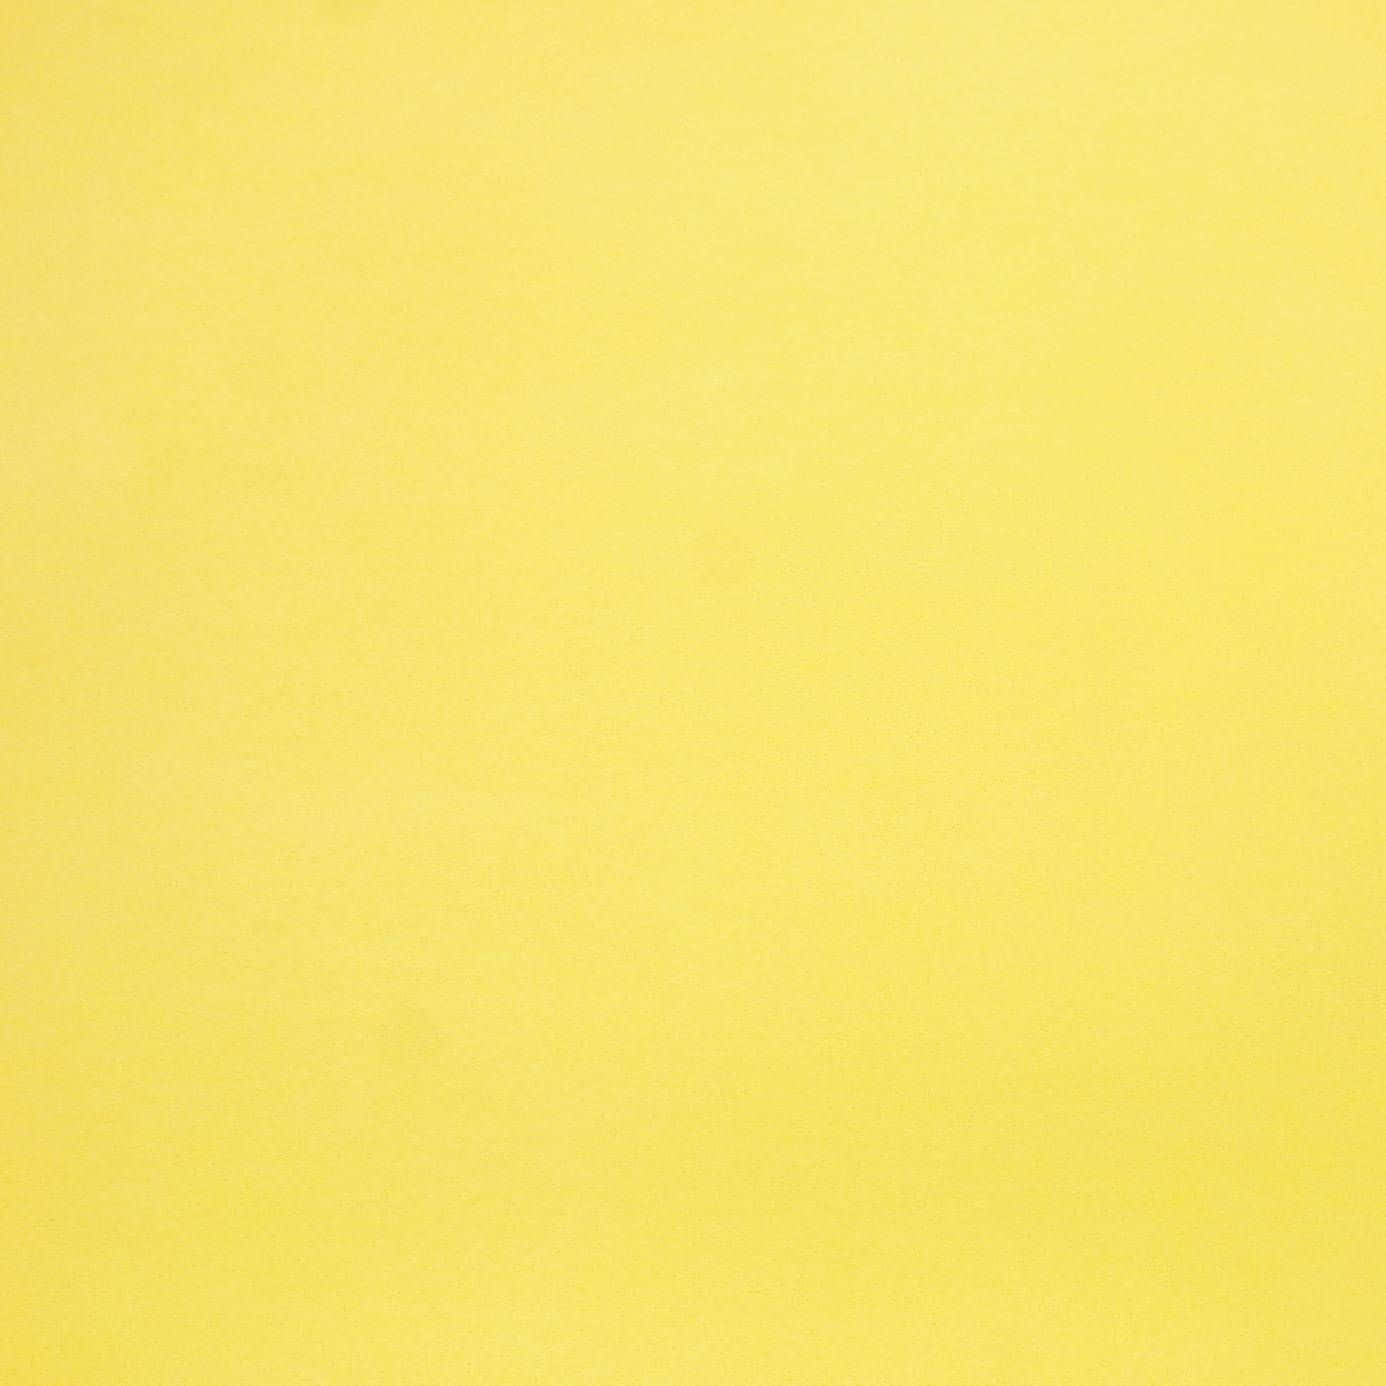 Brighten Your Day with a Vibrant Solid Yellow Wallpaper